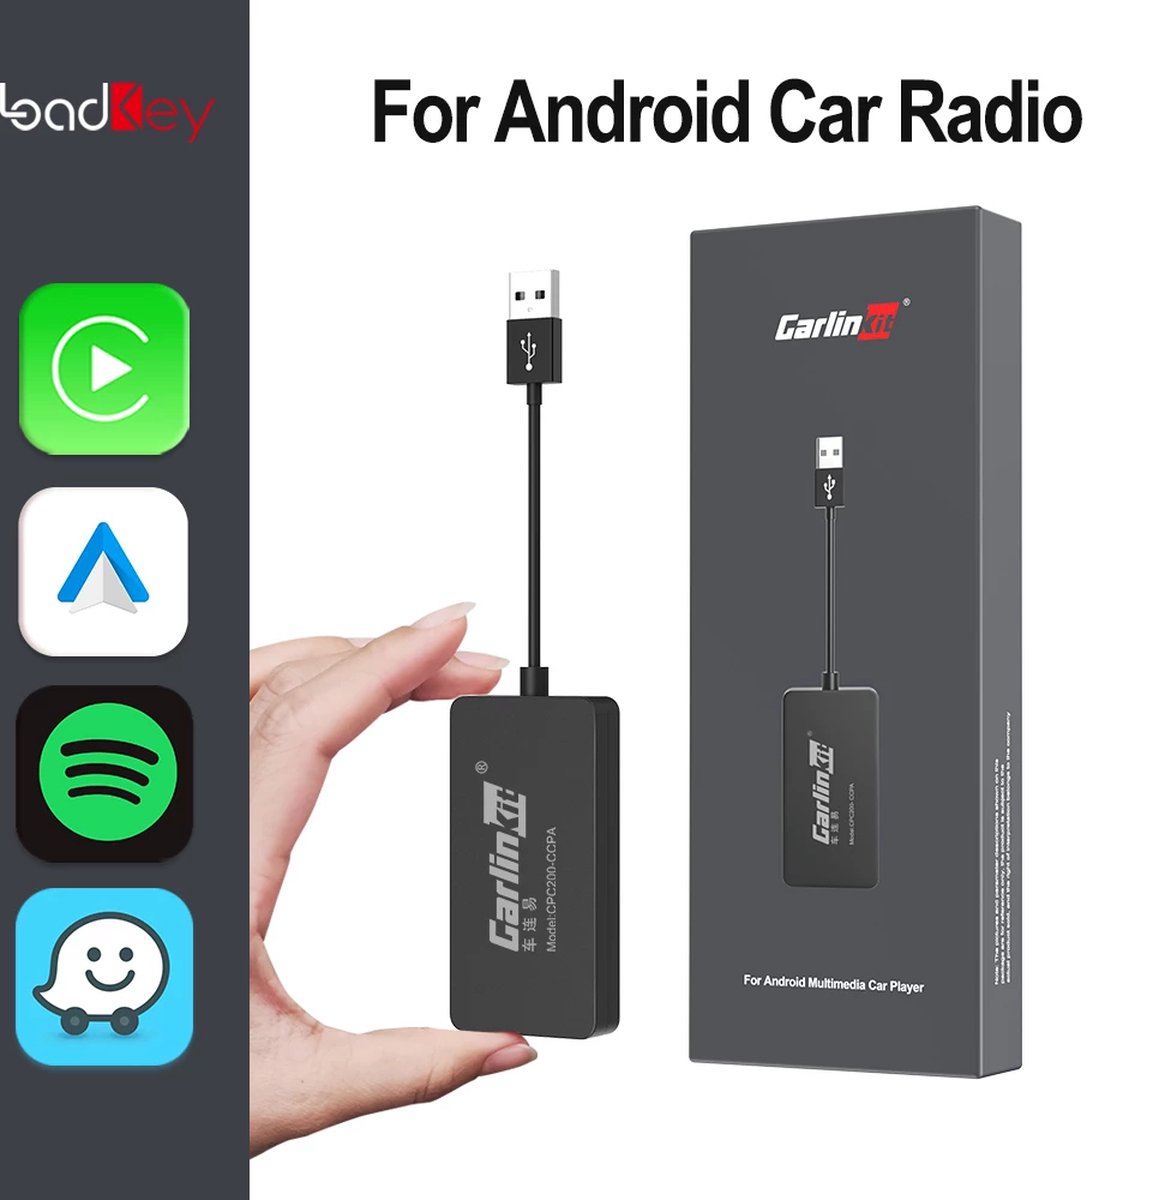 SLVE Products - Loadkey & Carlinkit Wired & Wireless Carplay Draadloze Android Auto Dongle Voor Wijzigen Android Screen Auto Ariplay